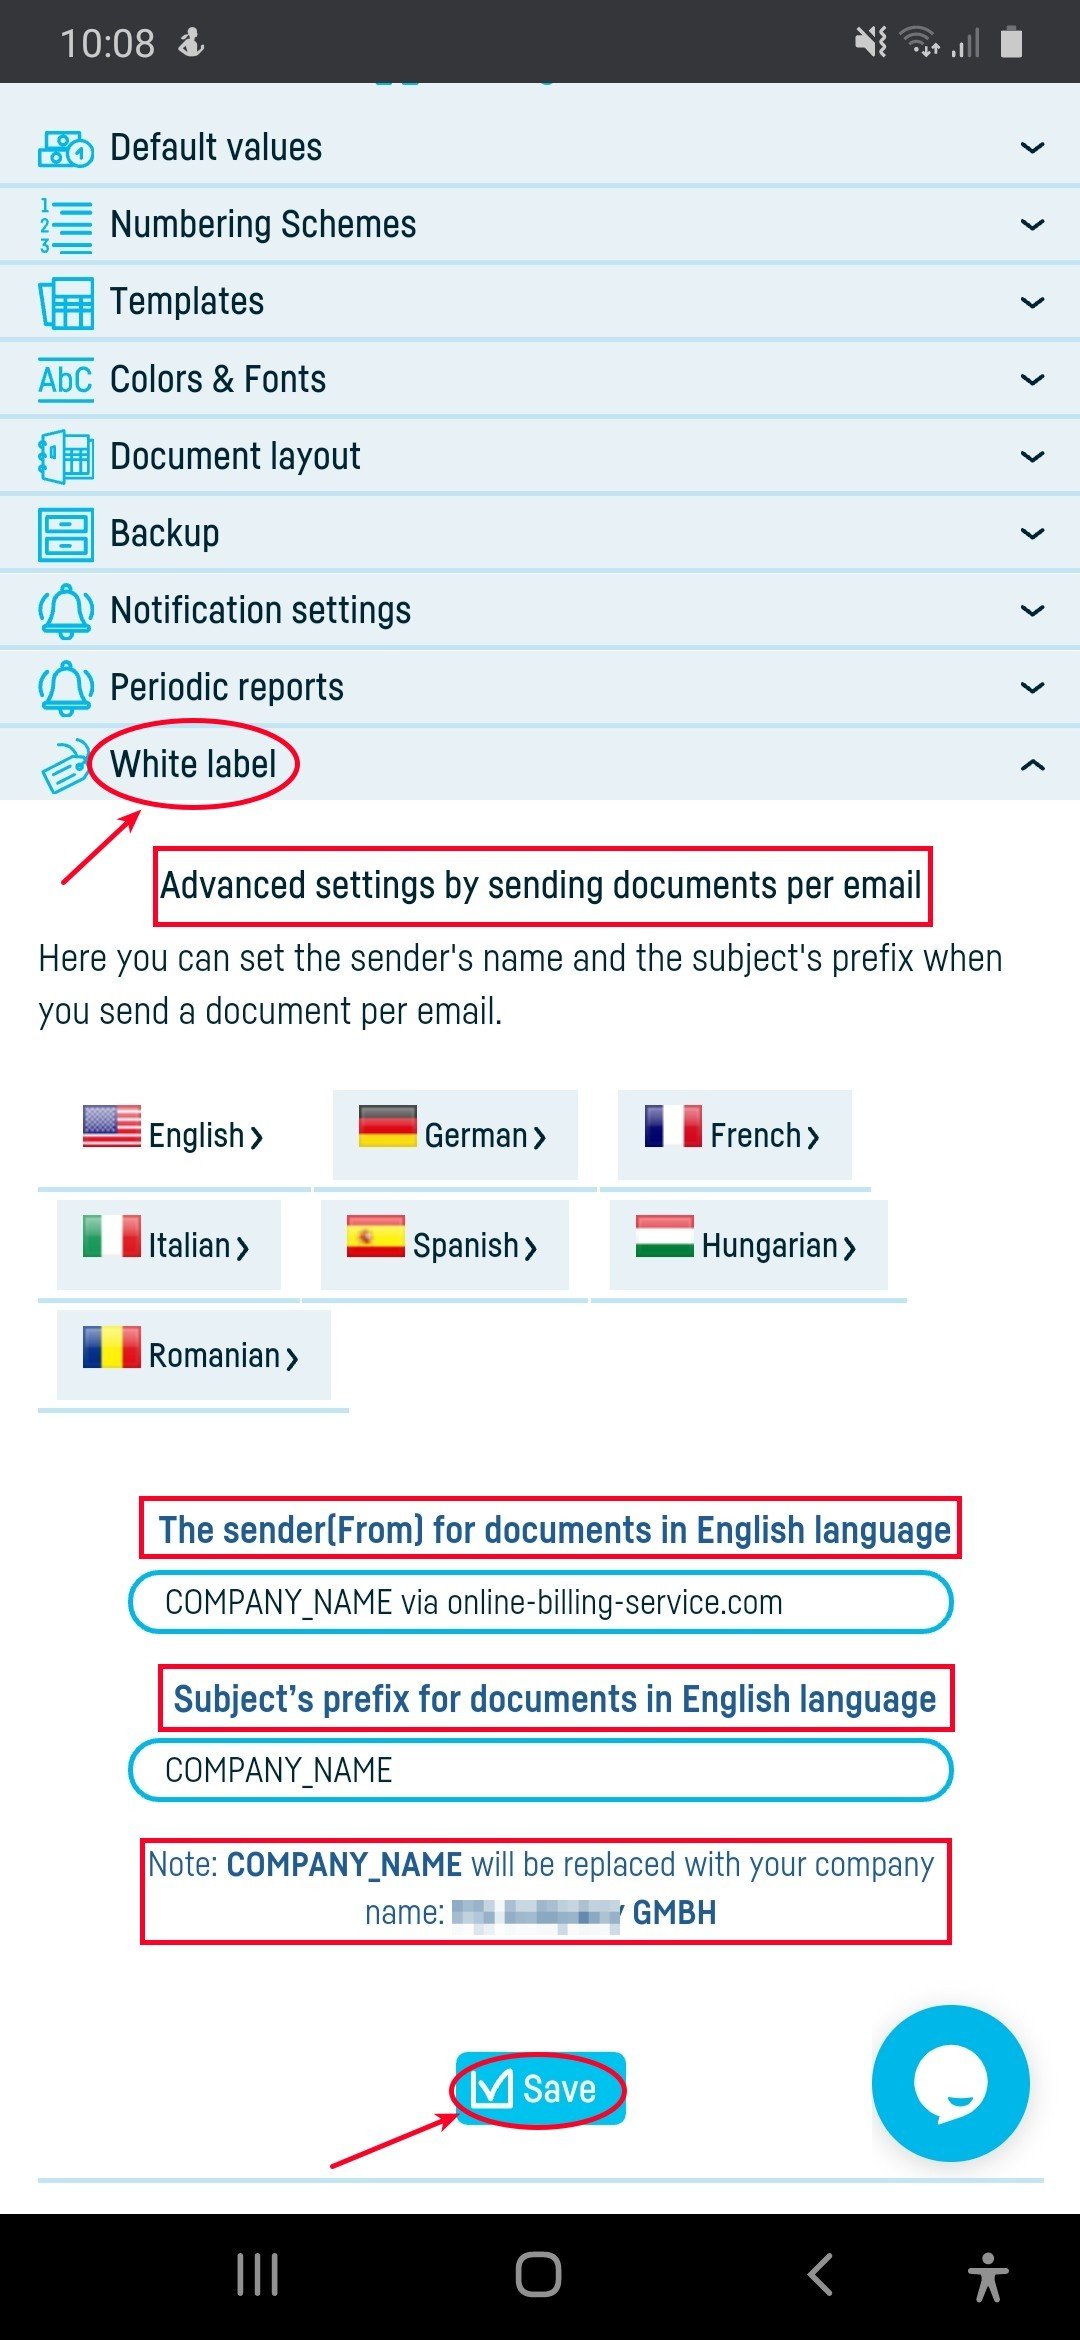 Advanced settings for sending documents by email - step 2